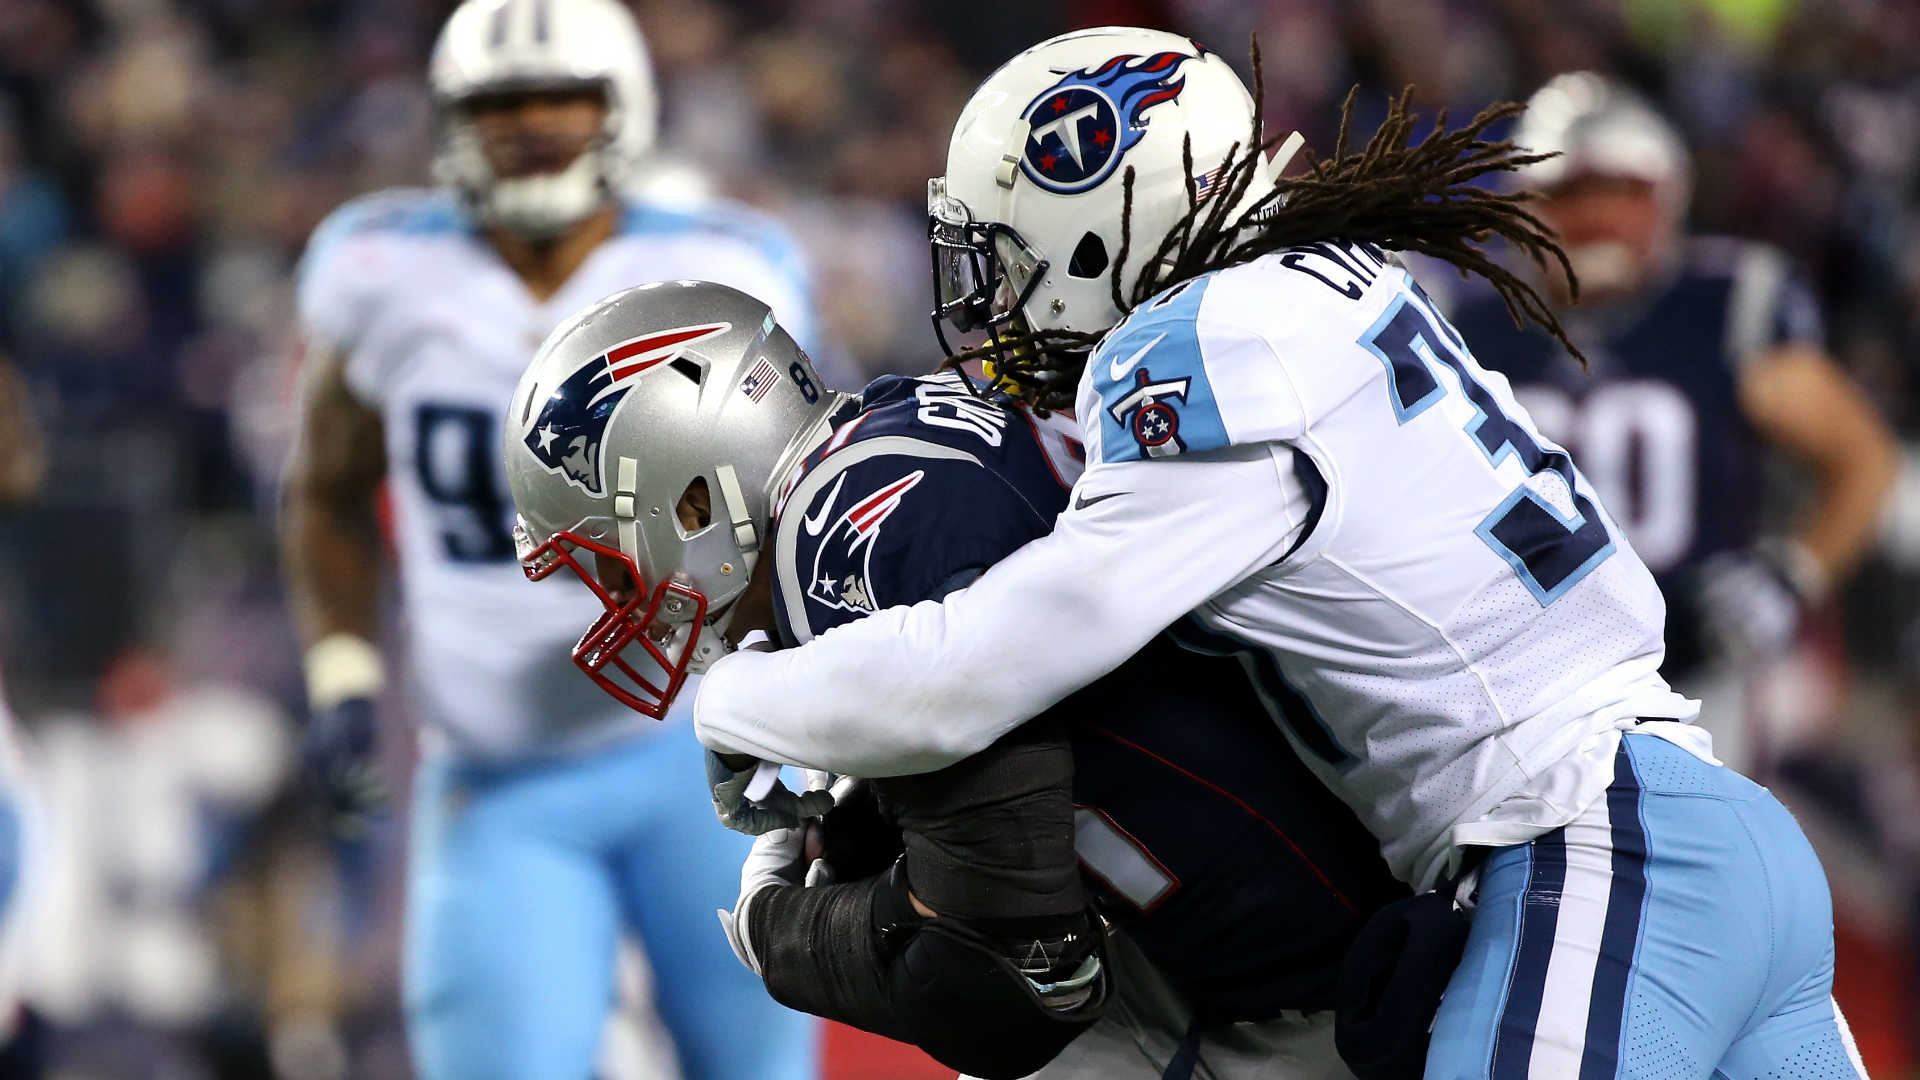 Johnathan Cyprien injury update: Titans starting safety out for season with torn ACL